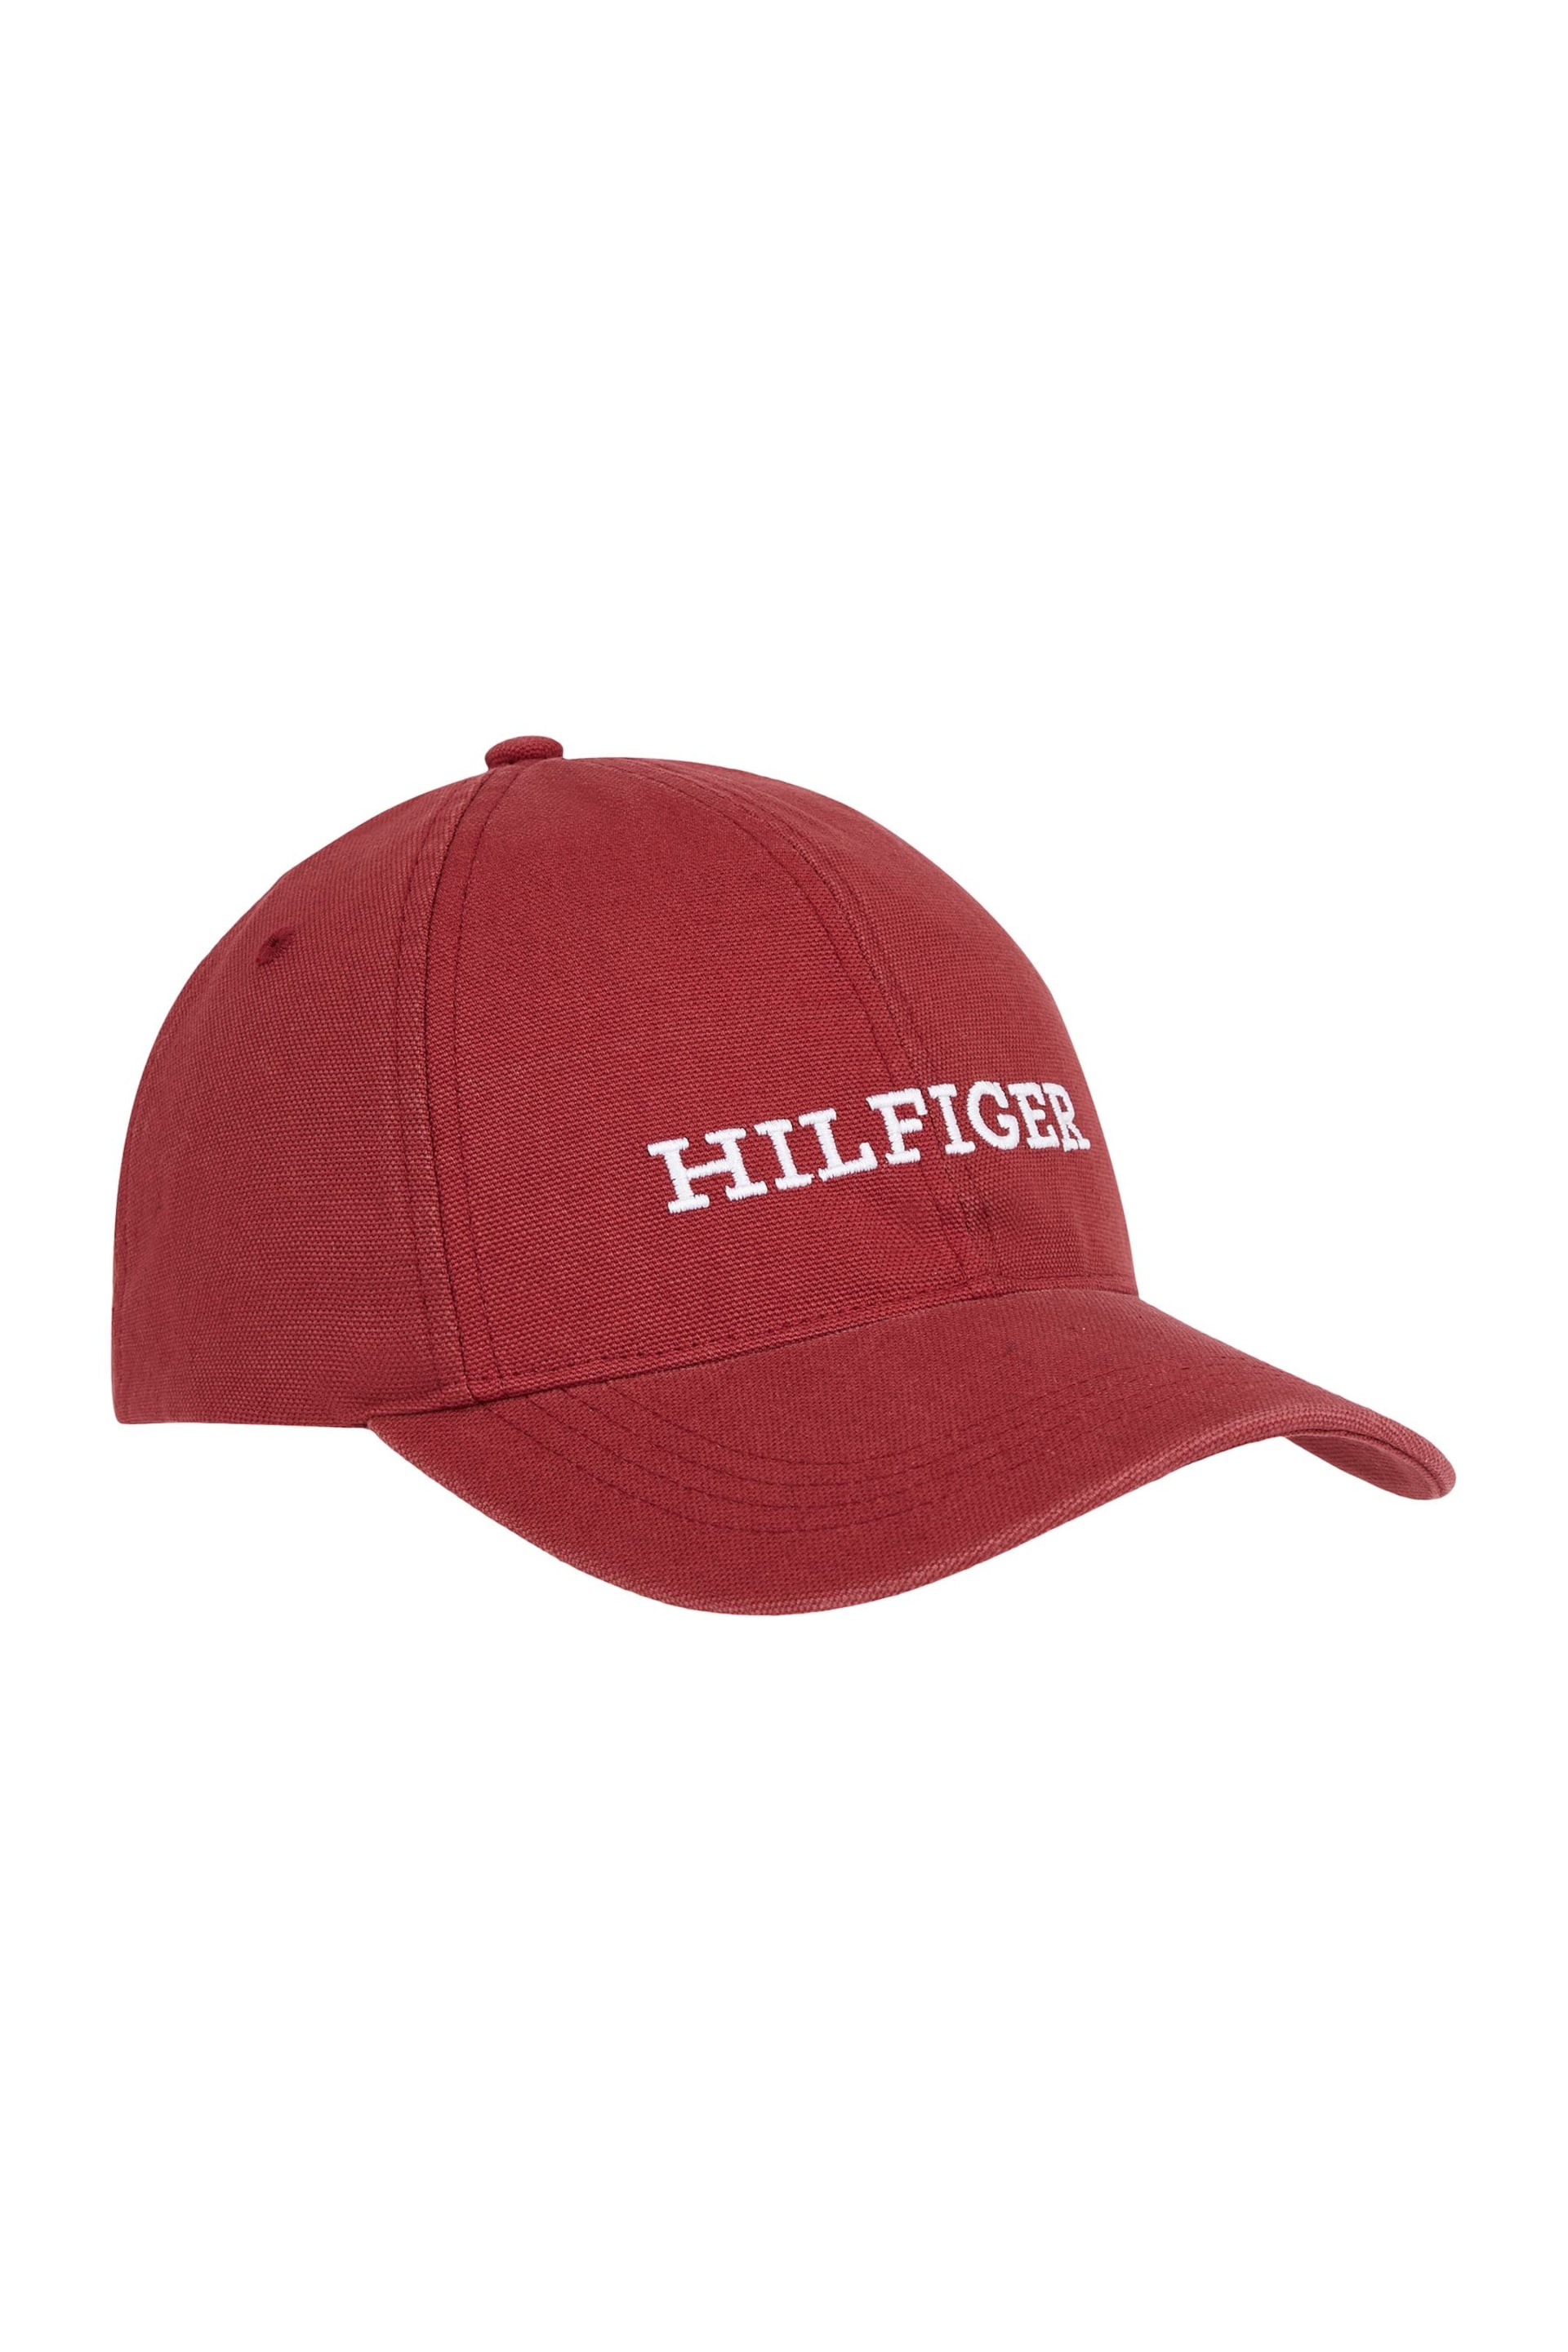 Tommy Hilfiger Red Monotype Logo Cap - Image 1 of 3